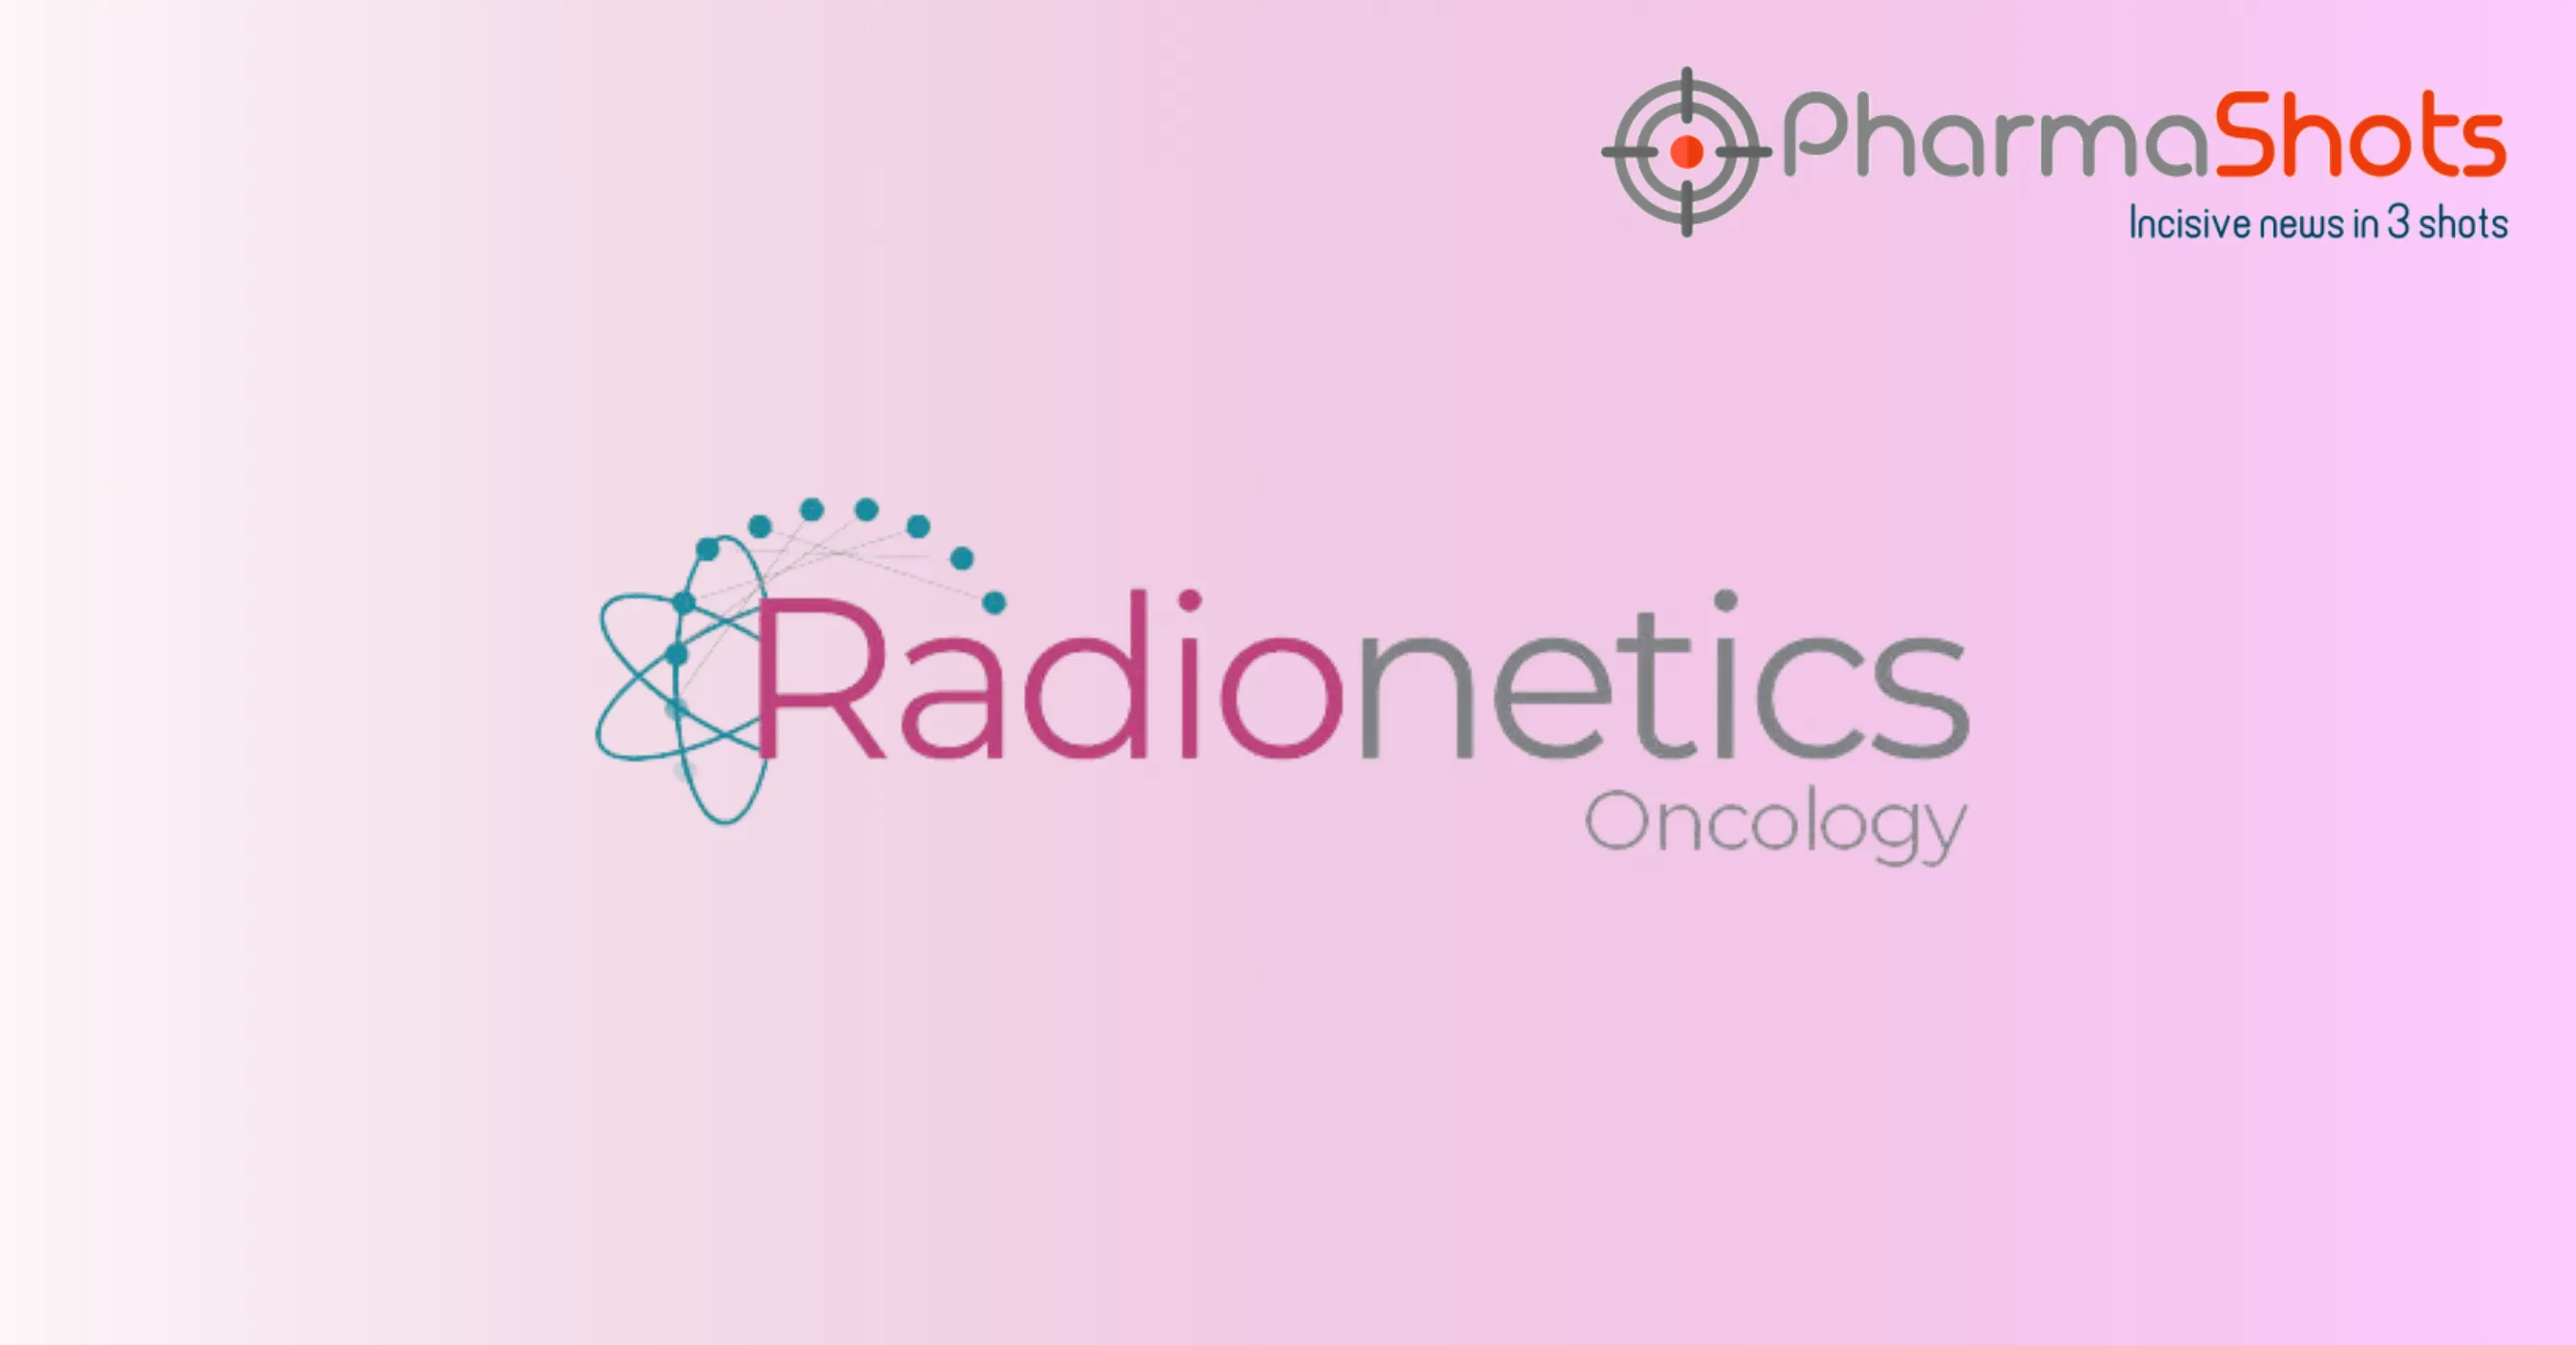 Radionetics Oncology and Eli Lilly Collaborate to Develop Small Molecule Radiopharmaceuticals